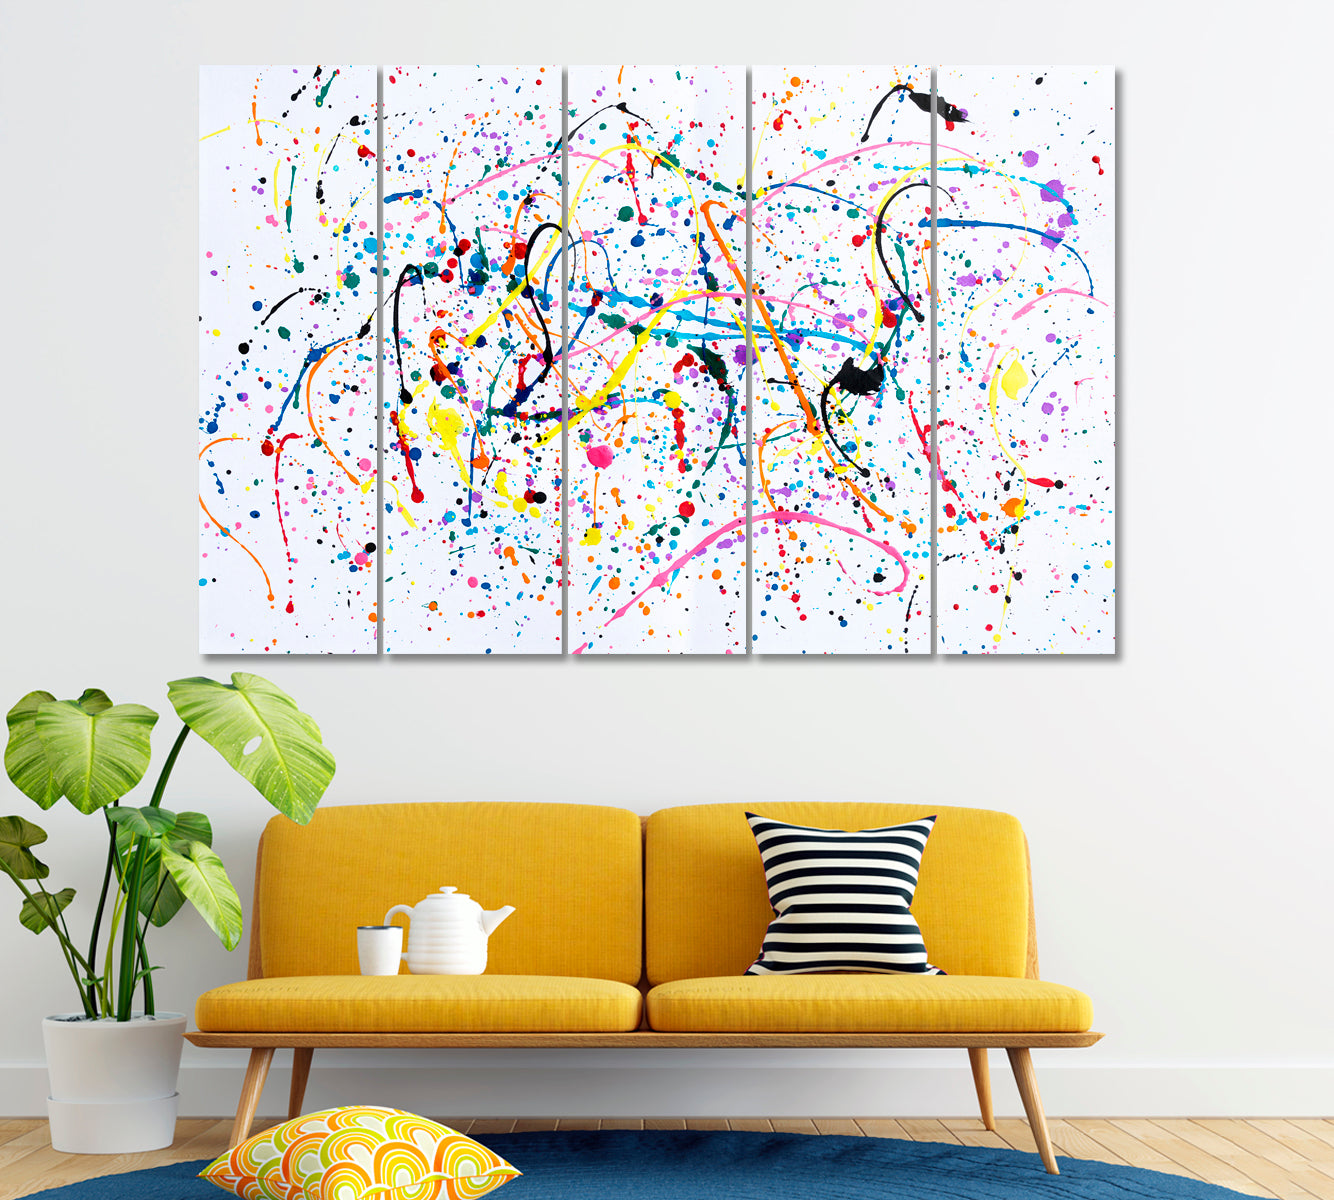 Abstract Watercolour Splashes and Drips Canvas Print ArtLexy 5 Panels 36"x24" inches 